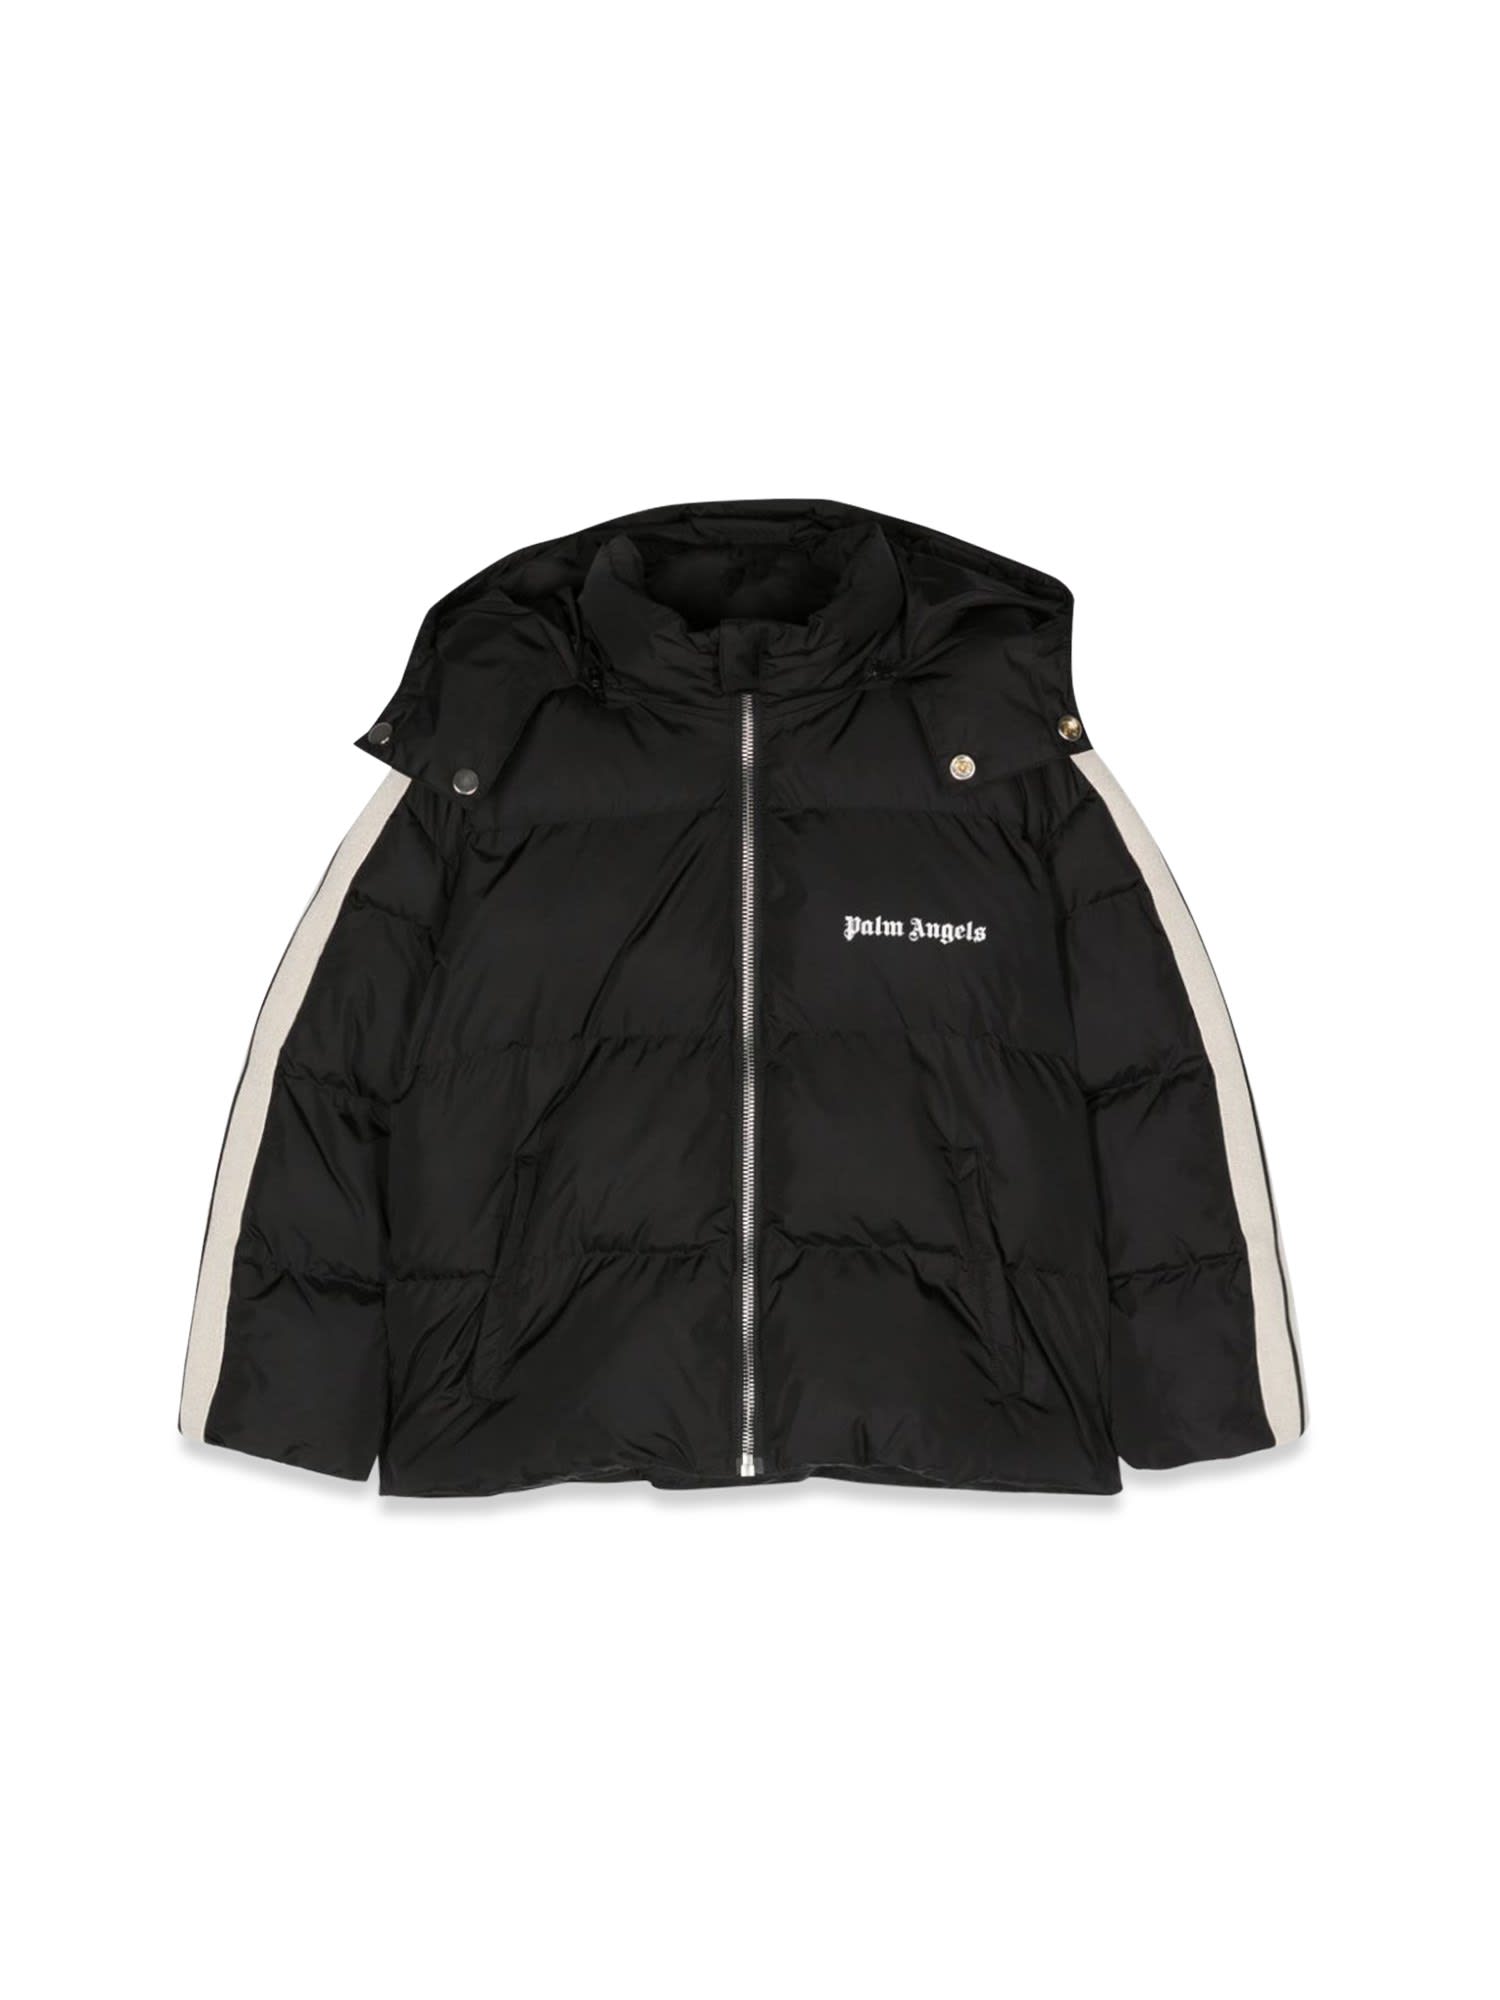 PALM ANGELS HOODED PUFFER JACKET